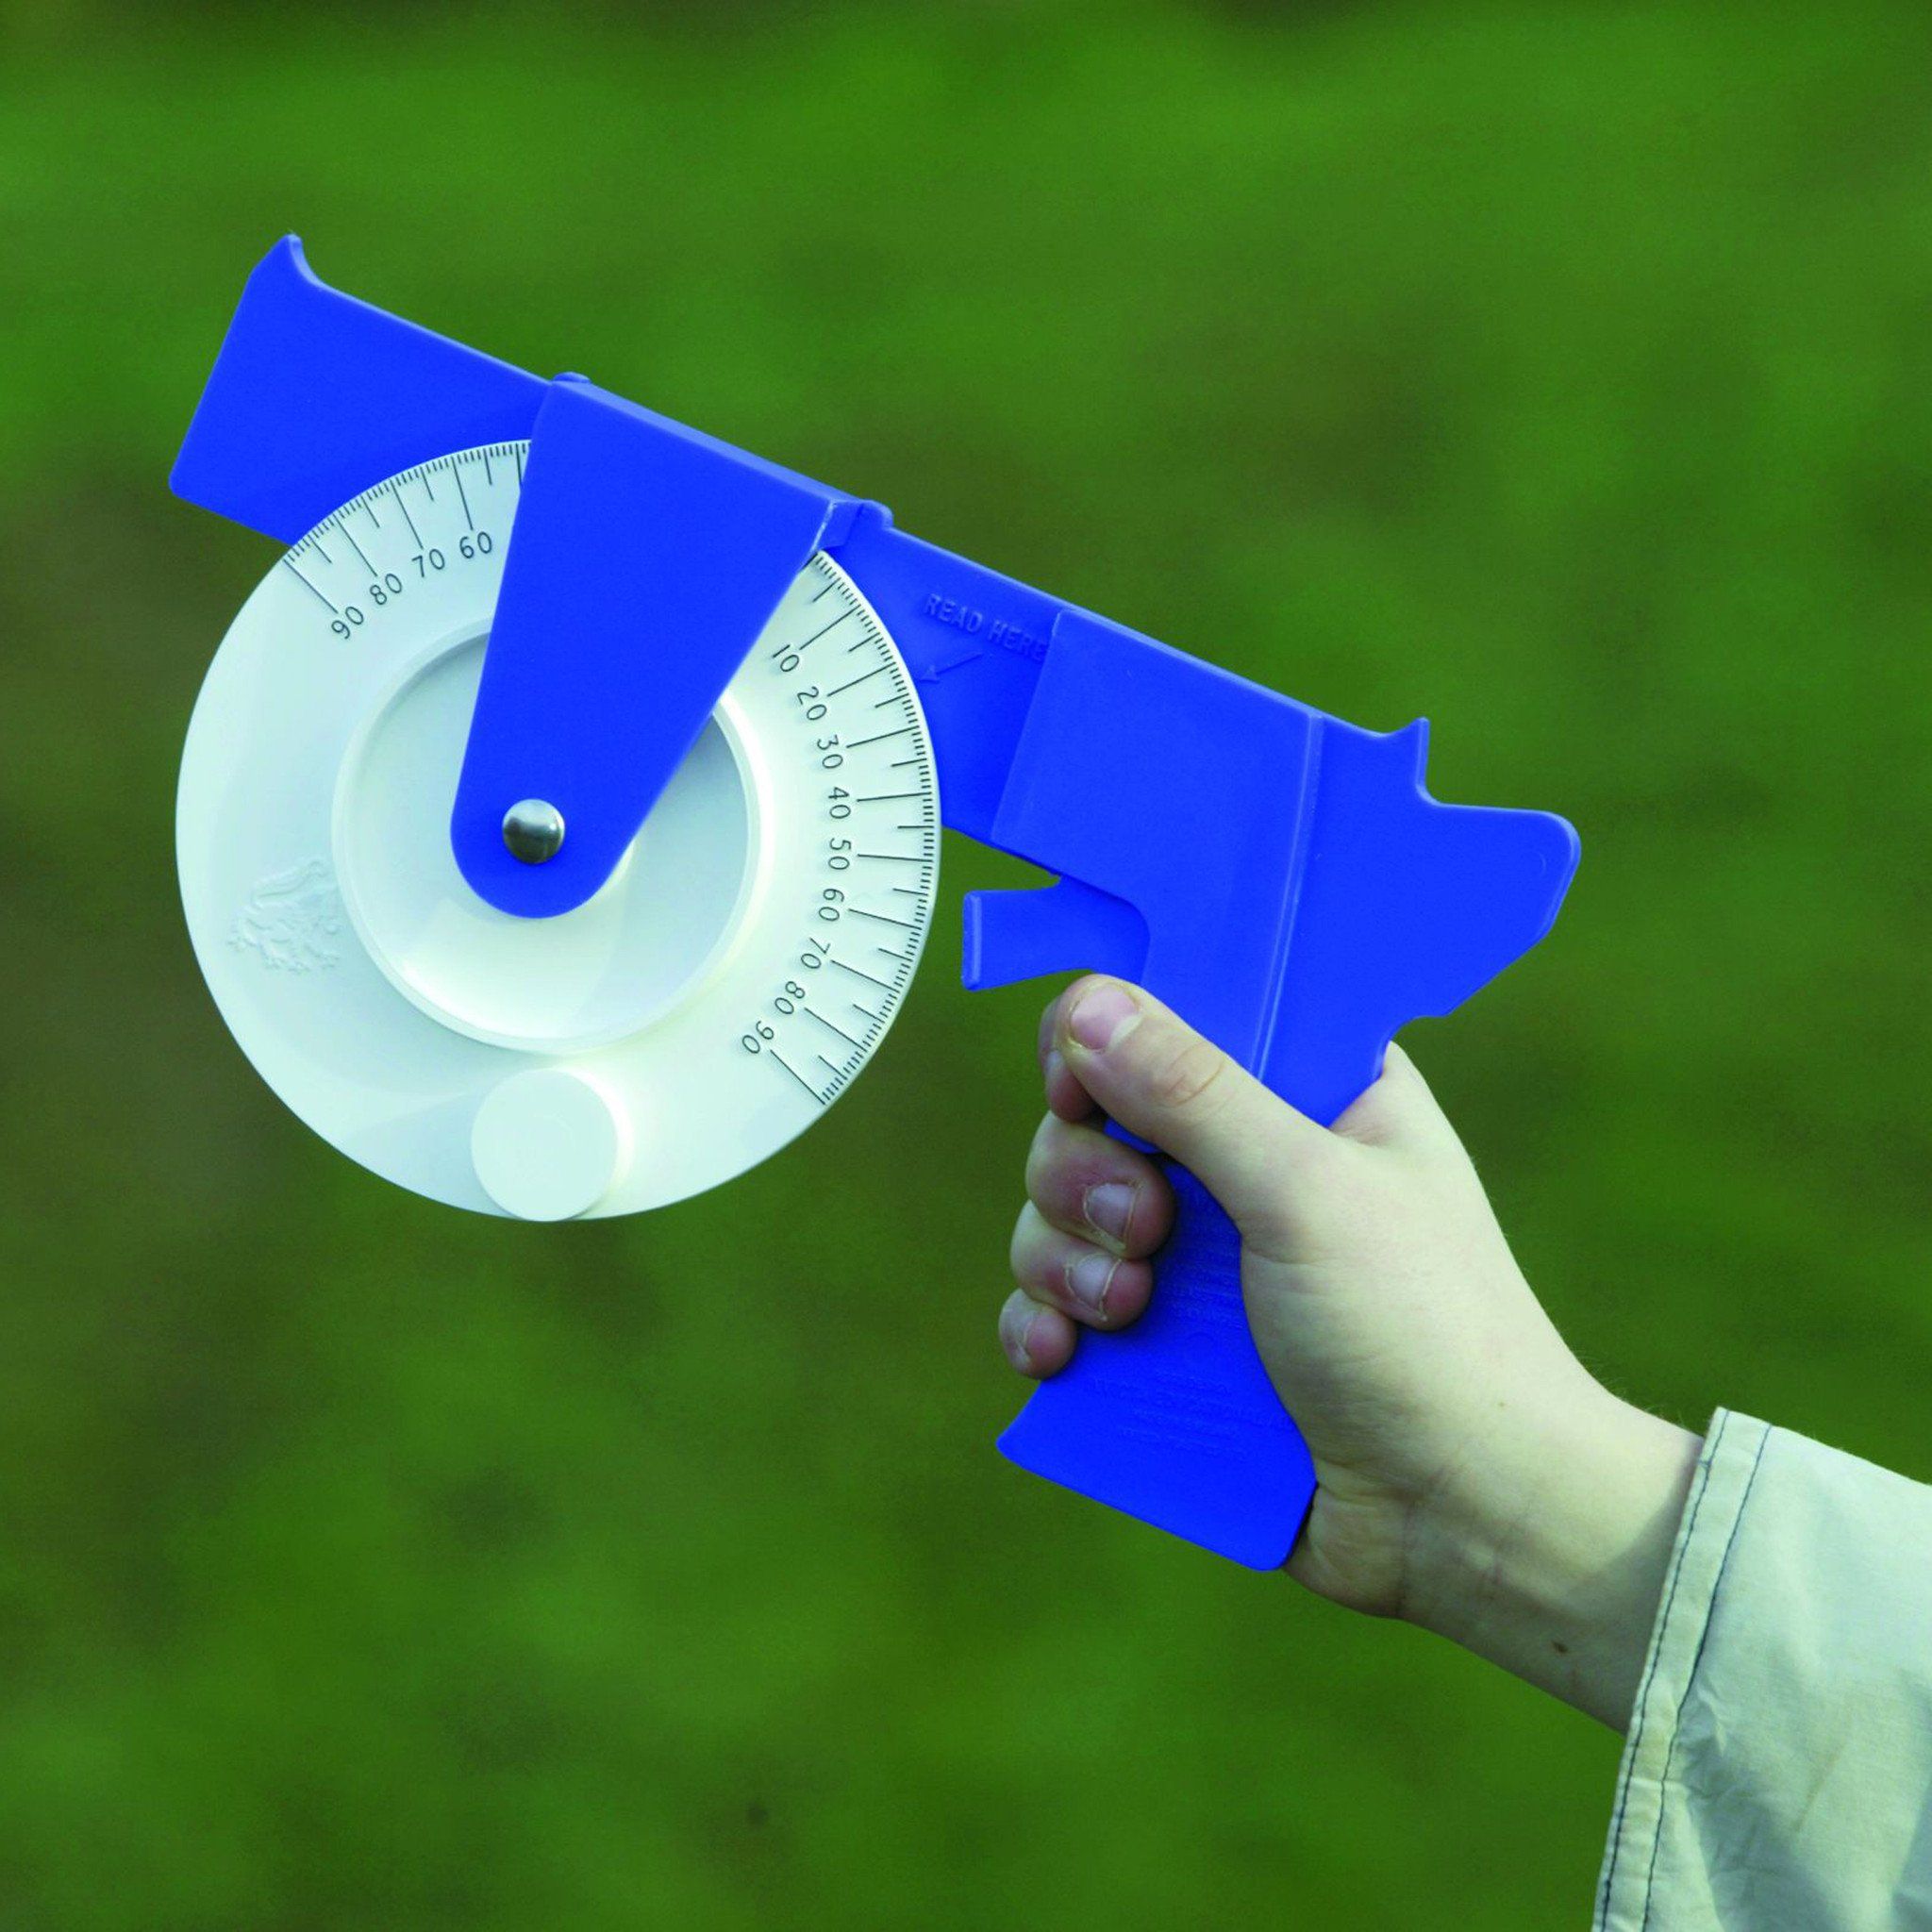 Fieldwork Equipment - Clinometer - For Measuring The Angle Of Elevation